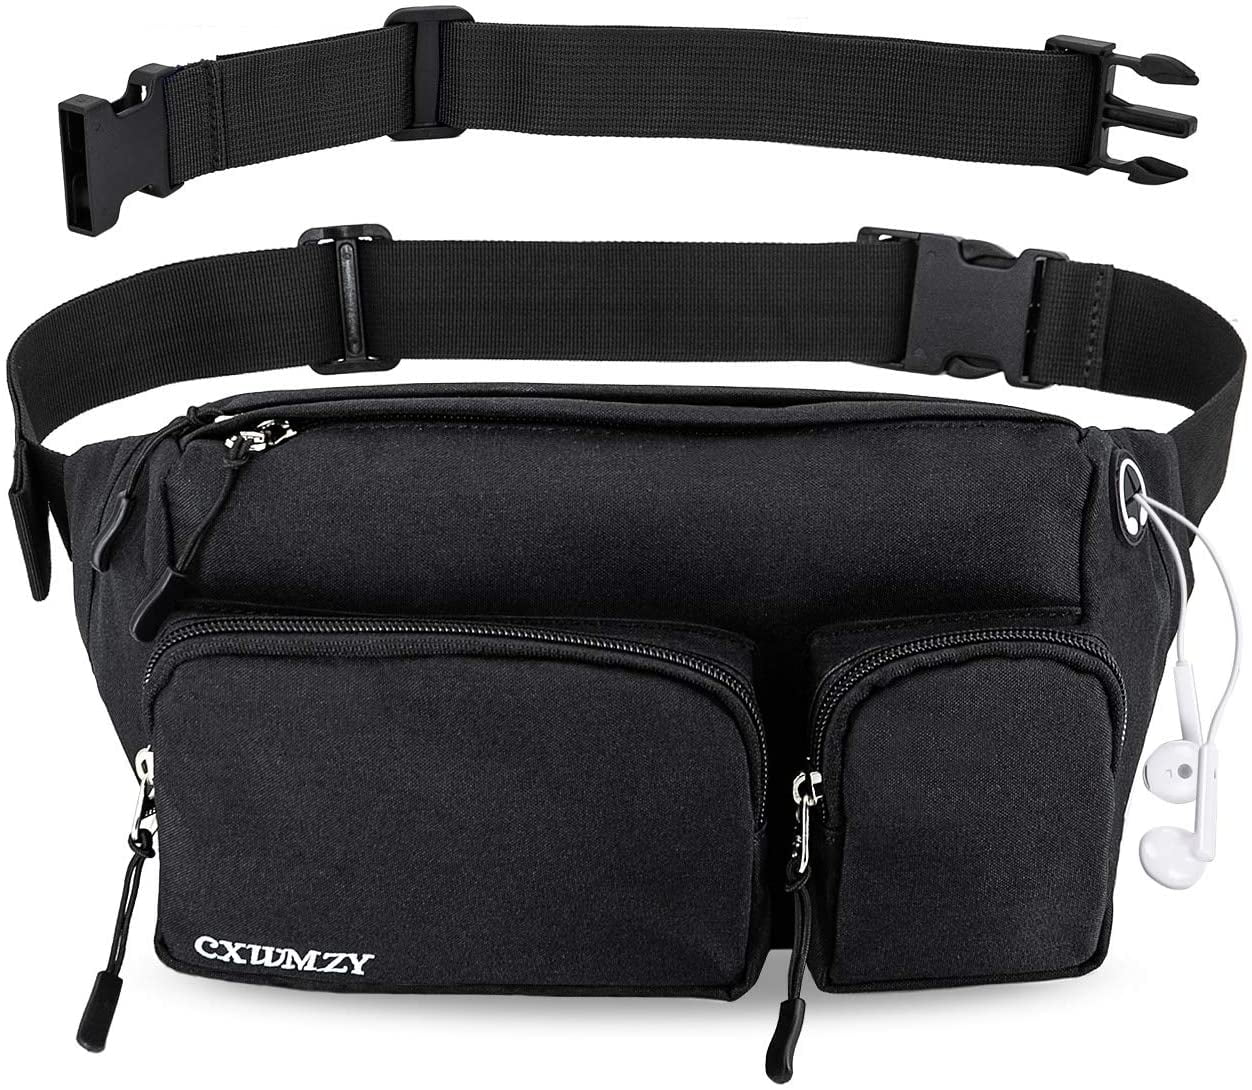 Not waterproof-BLACK Fanny Pack,Waist Bag for Women Fashionable Running Belt Waist Pack for Travel Walking Running Hiking Cycling Easy Carry Any Phone,Wallet 